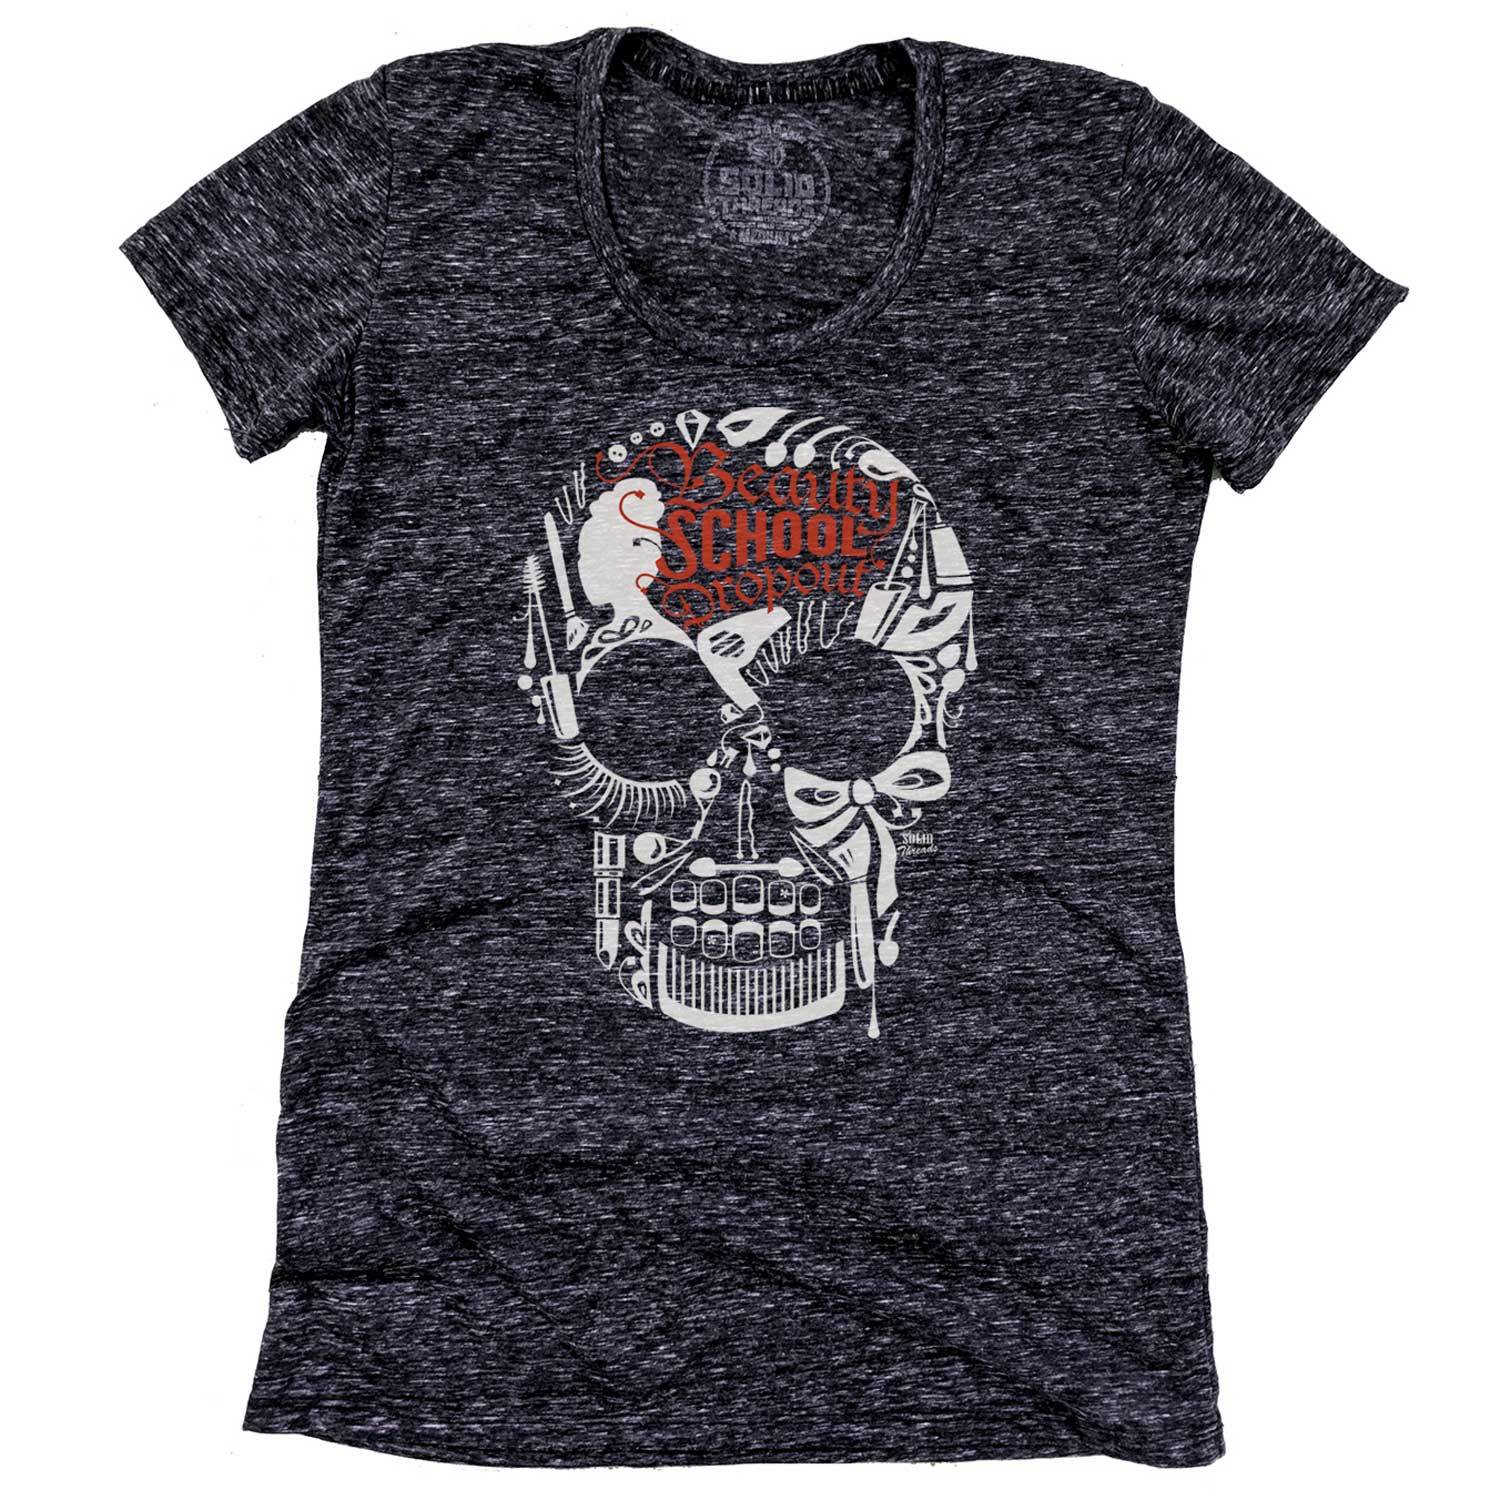 Women's Beauty School Drop Out Cool Graphic T-Shirt | Vintage Pretty Skull Tee | Solid Threads